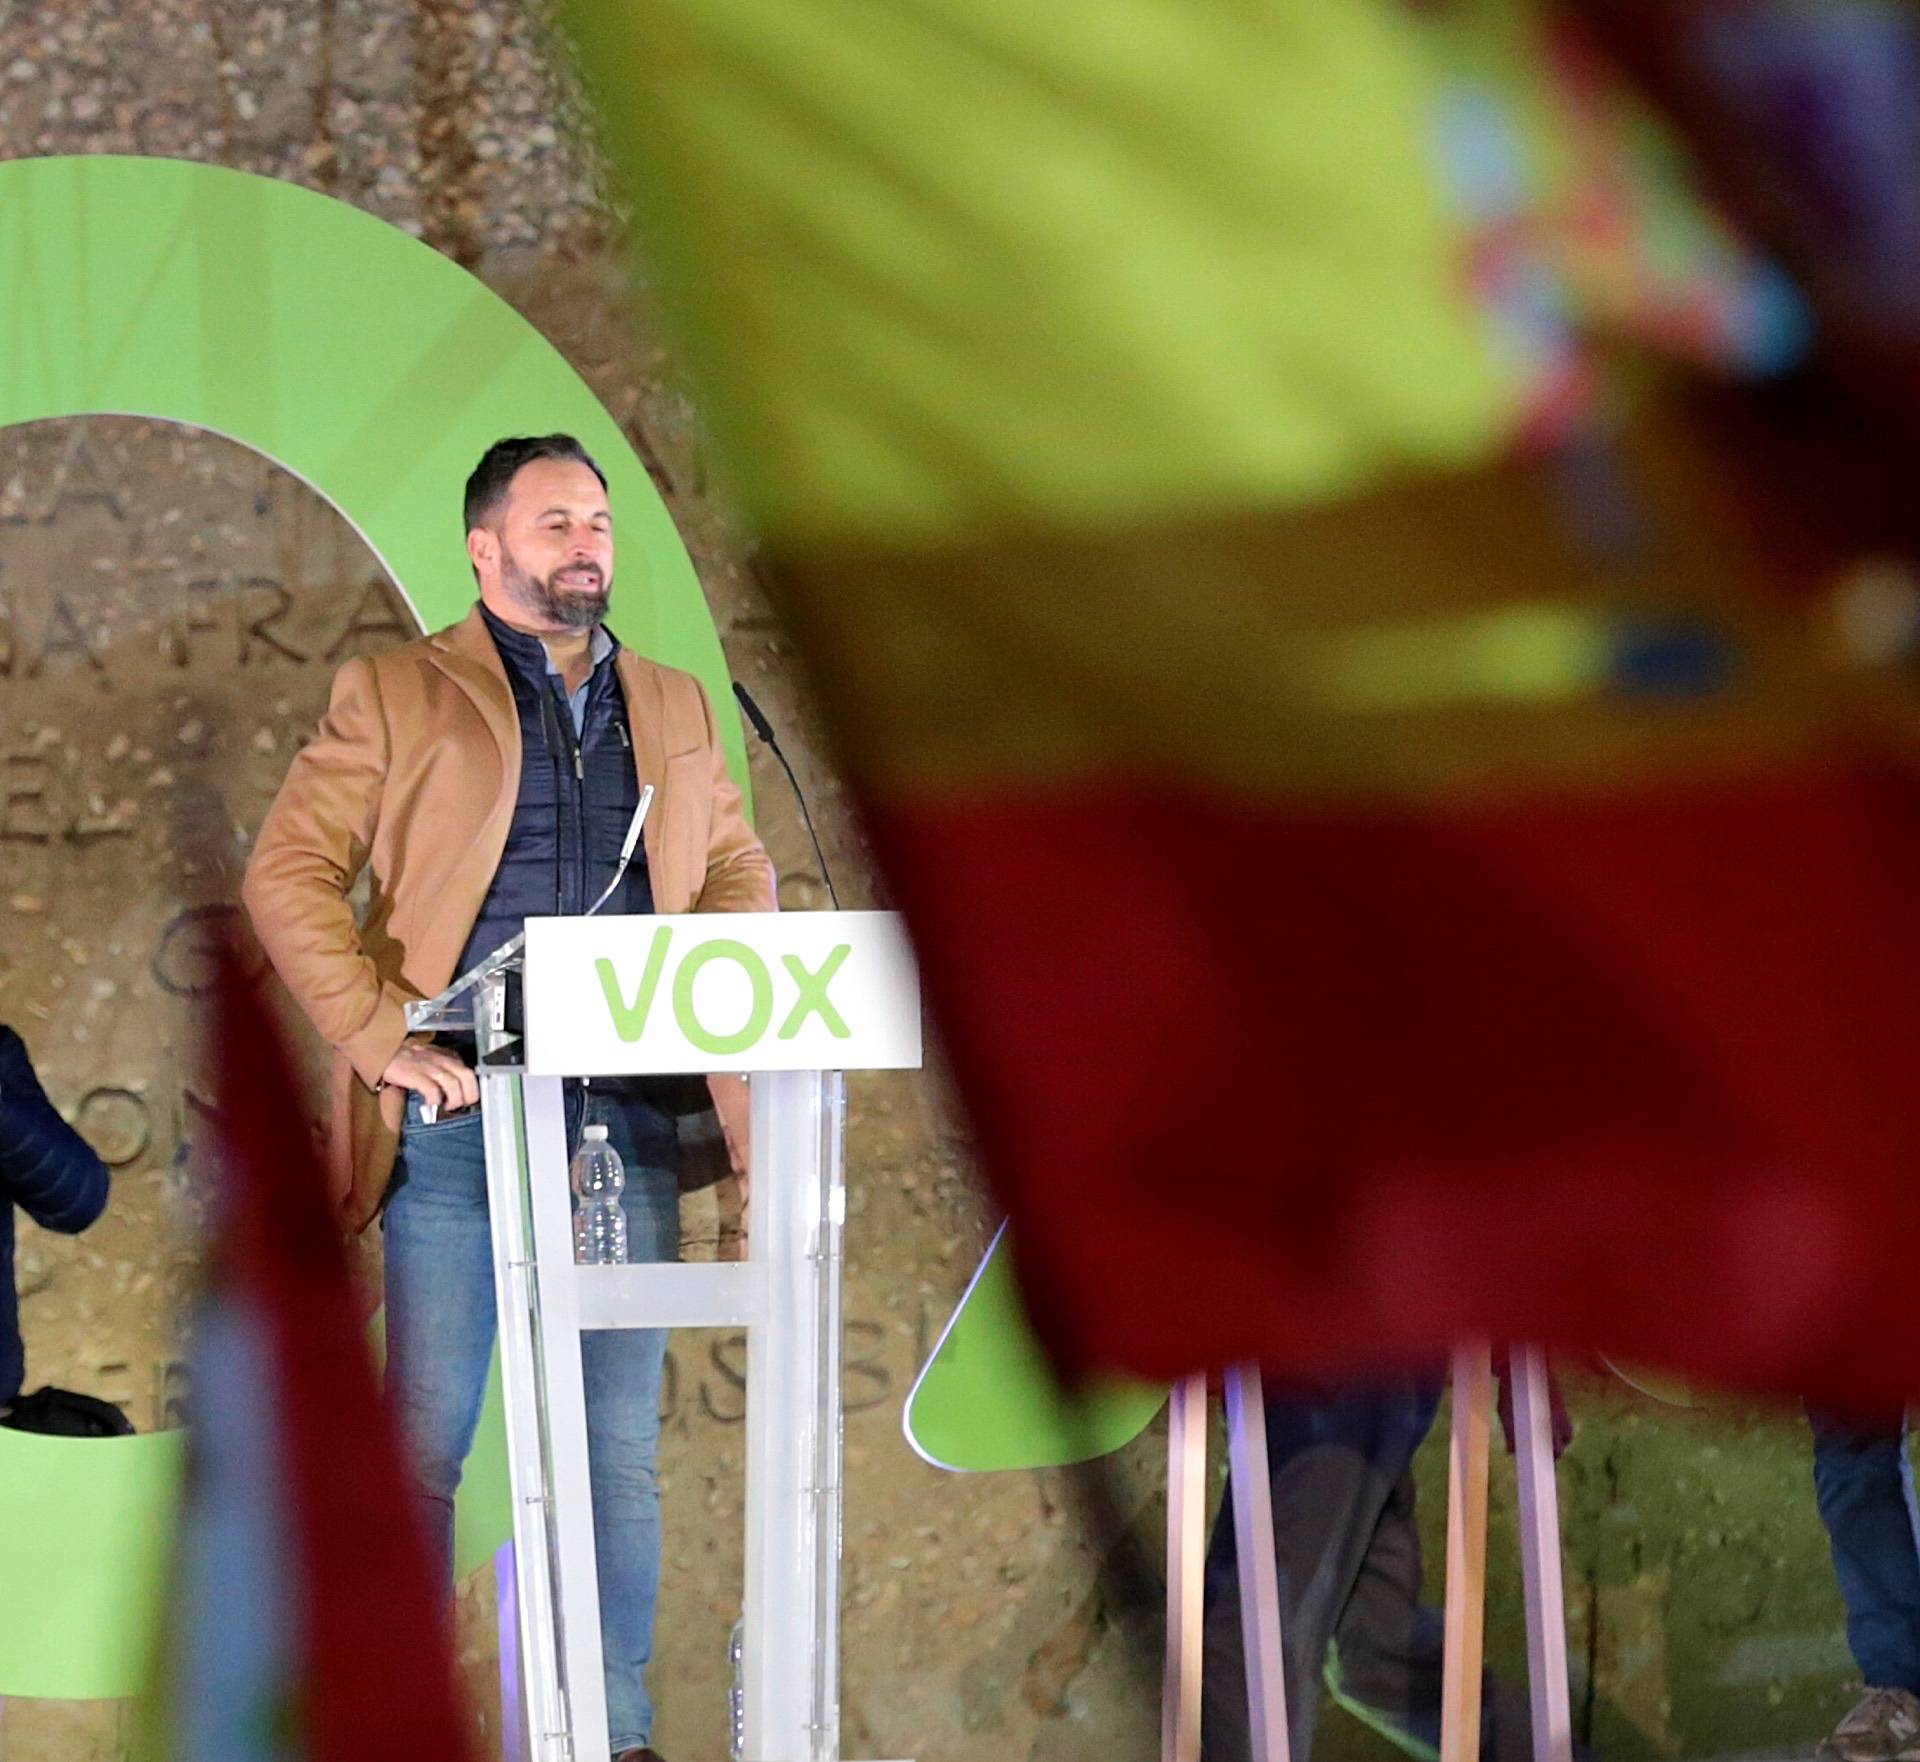 Vox closes campaign at Plaza Colón in the center of Madrid.